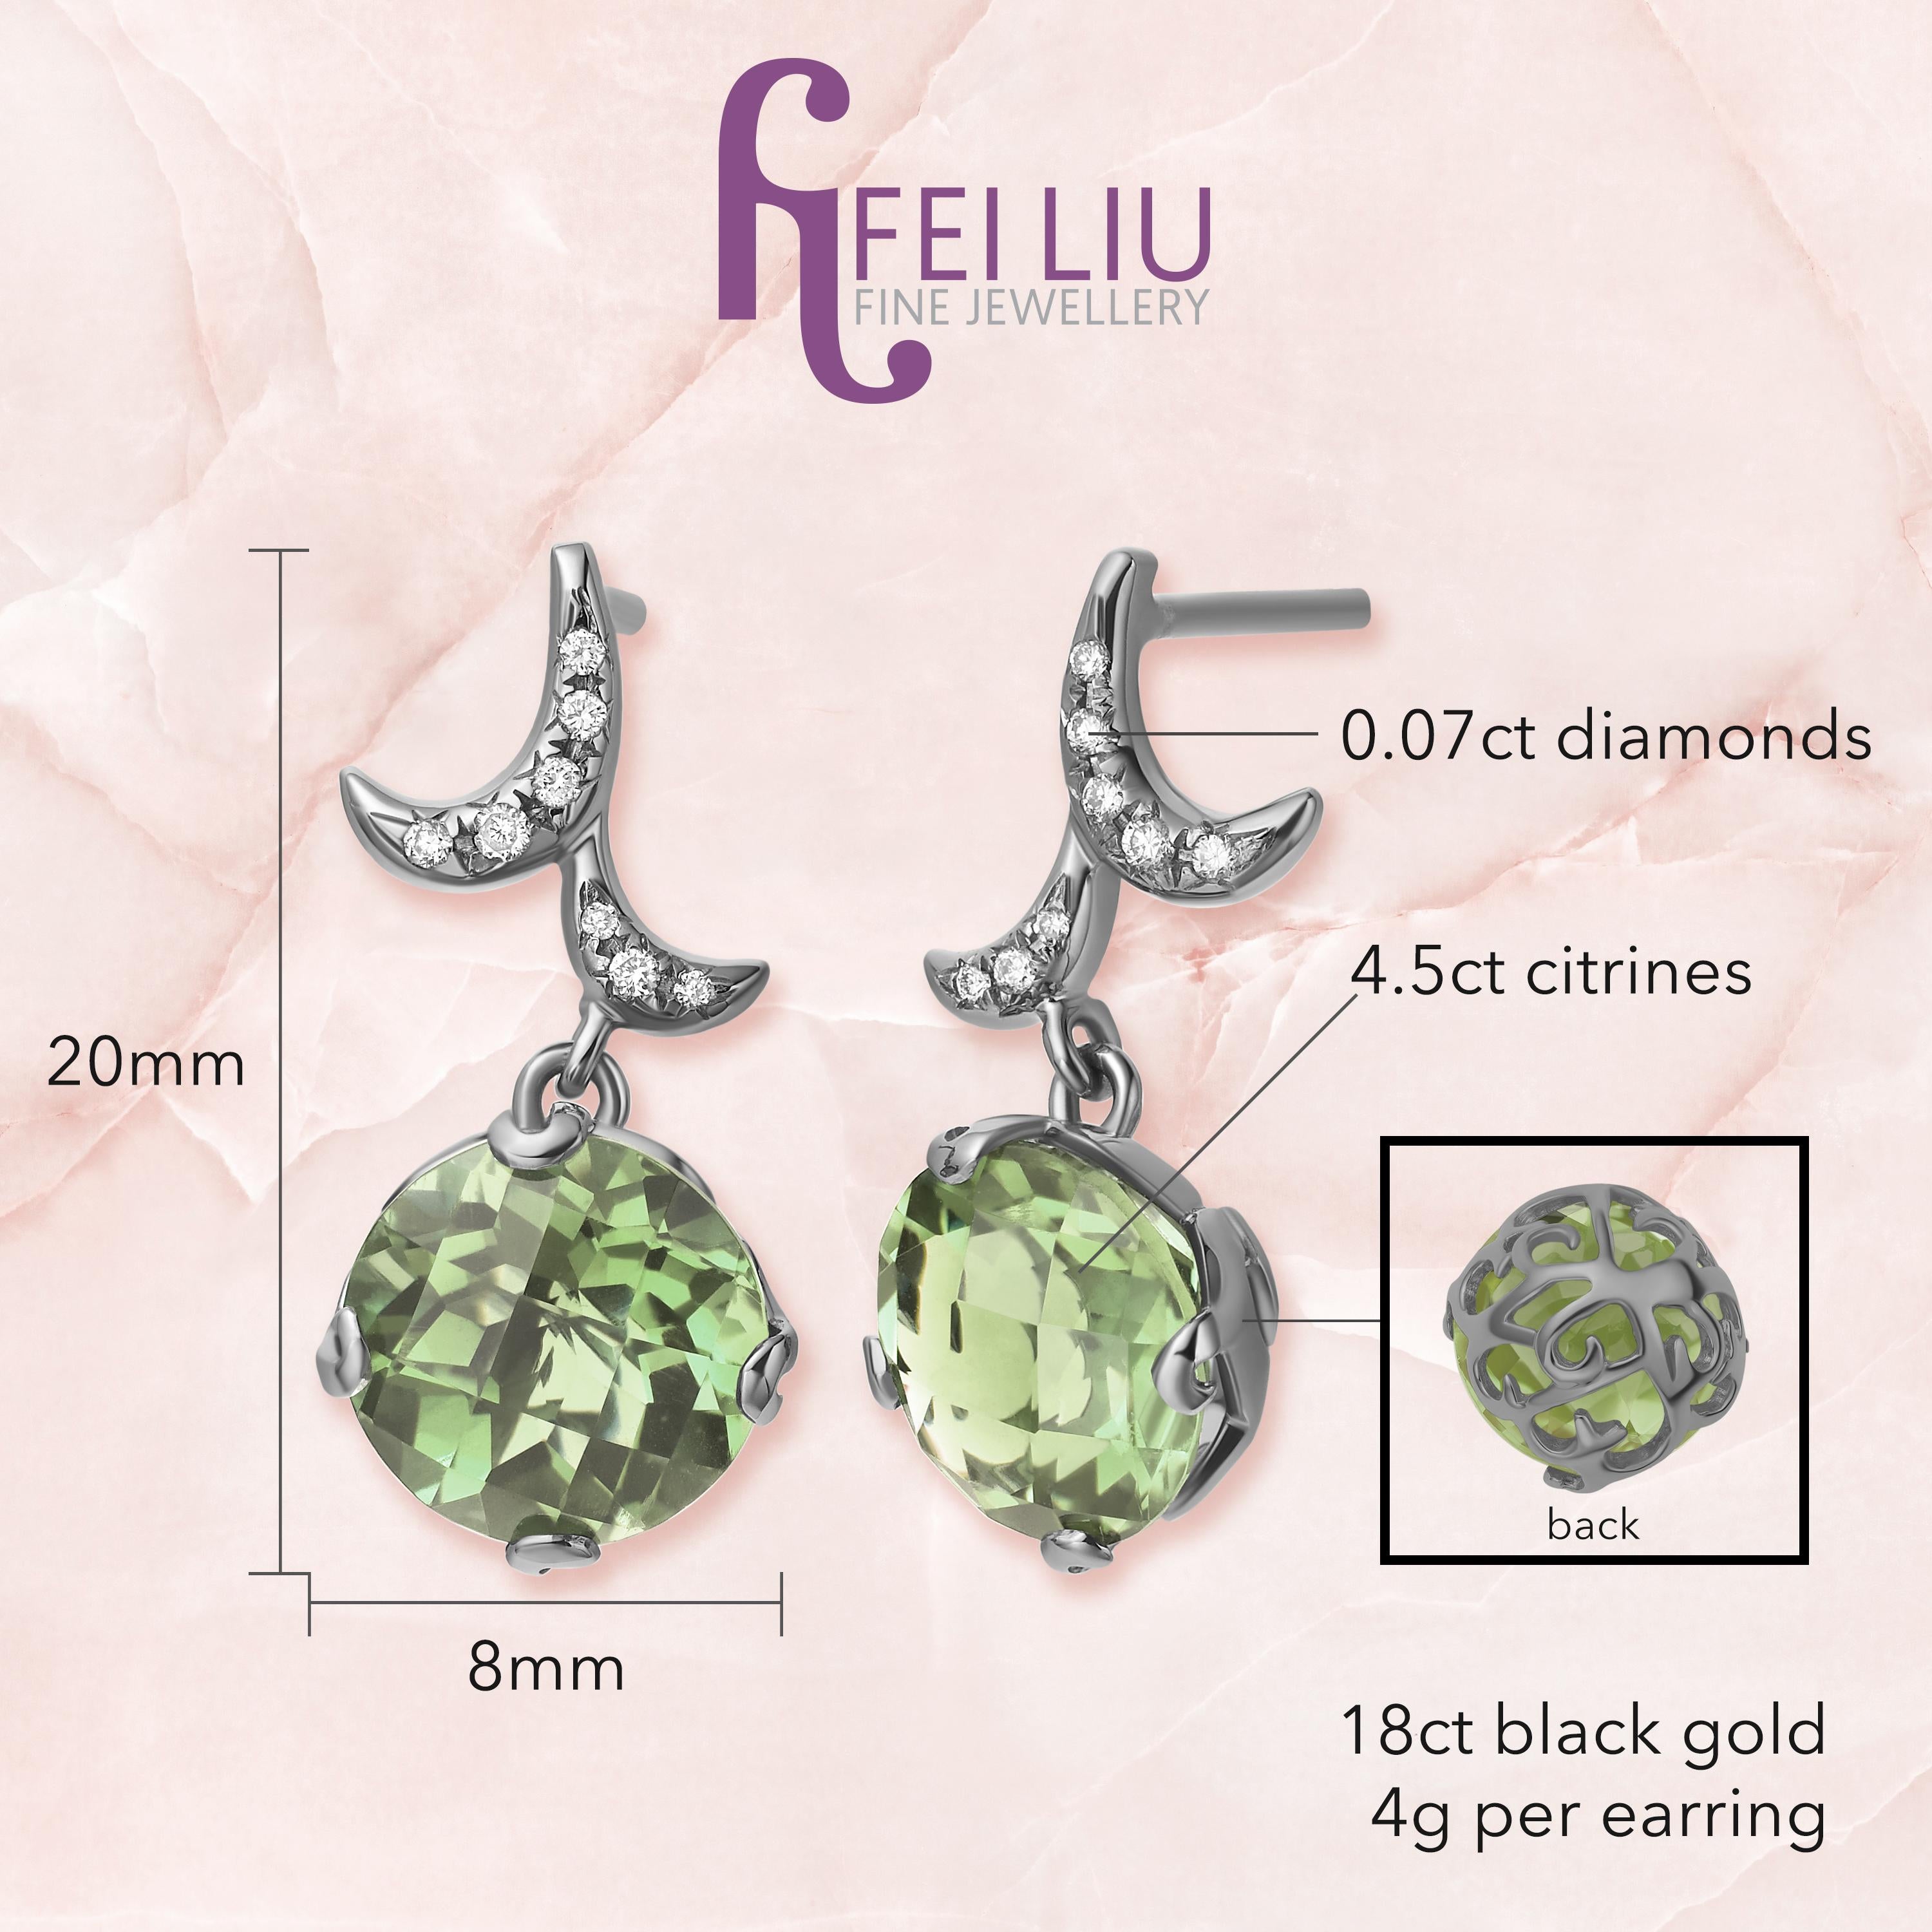 Description:
Emulating femininity and glamour, the Whispering collection is full of colour and form. Inspired by the twisting, sculptural shape of the exotic orchid flower. Whispering small round stone drop earrings with 4.5ct green amethyst and